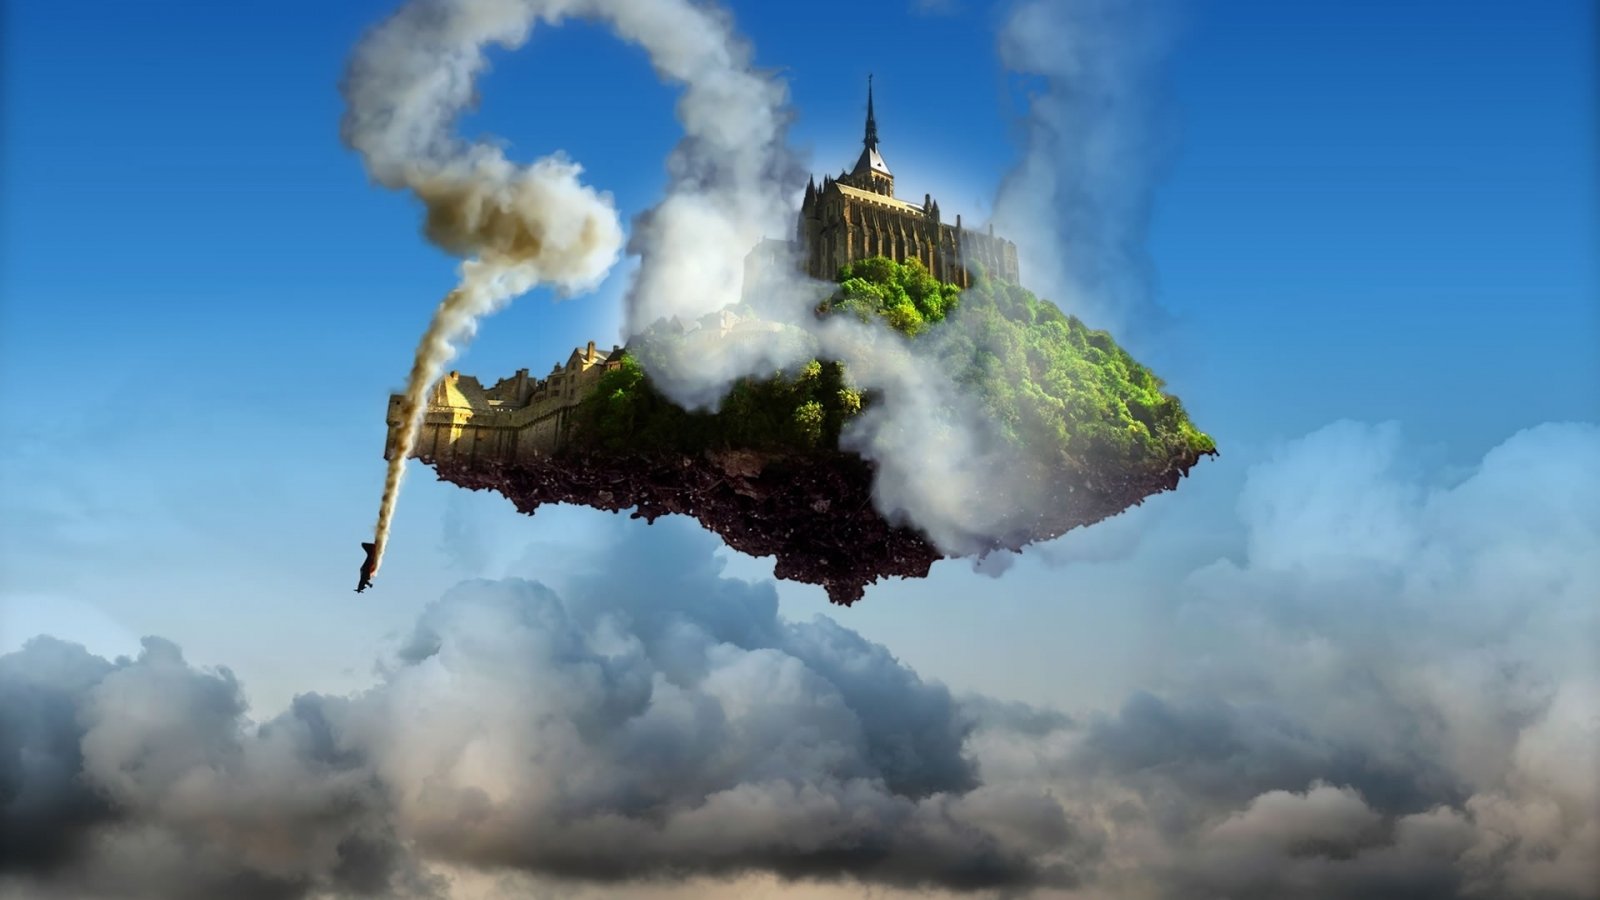 architecture, Ancient, Tower, Clouds, Floating island, Smoke, Plants, Digital art, Building, Cathedral Wallpaper